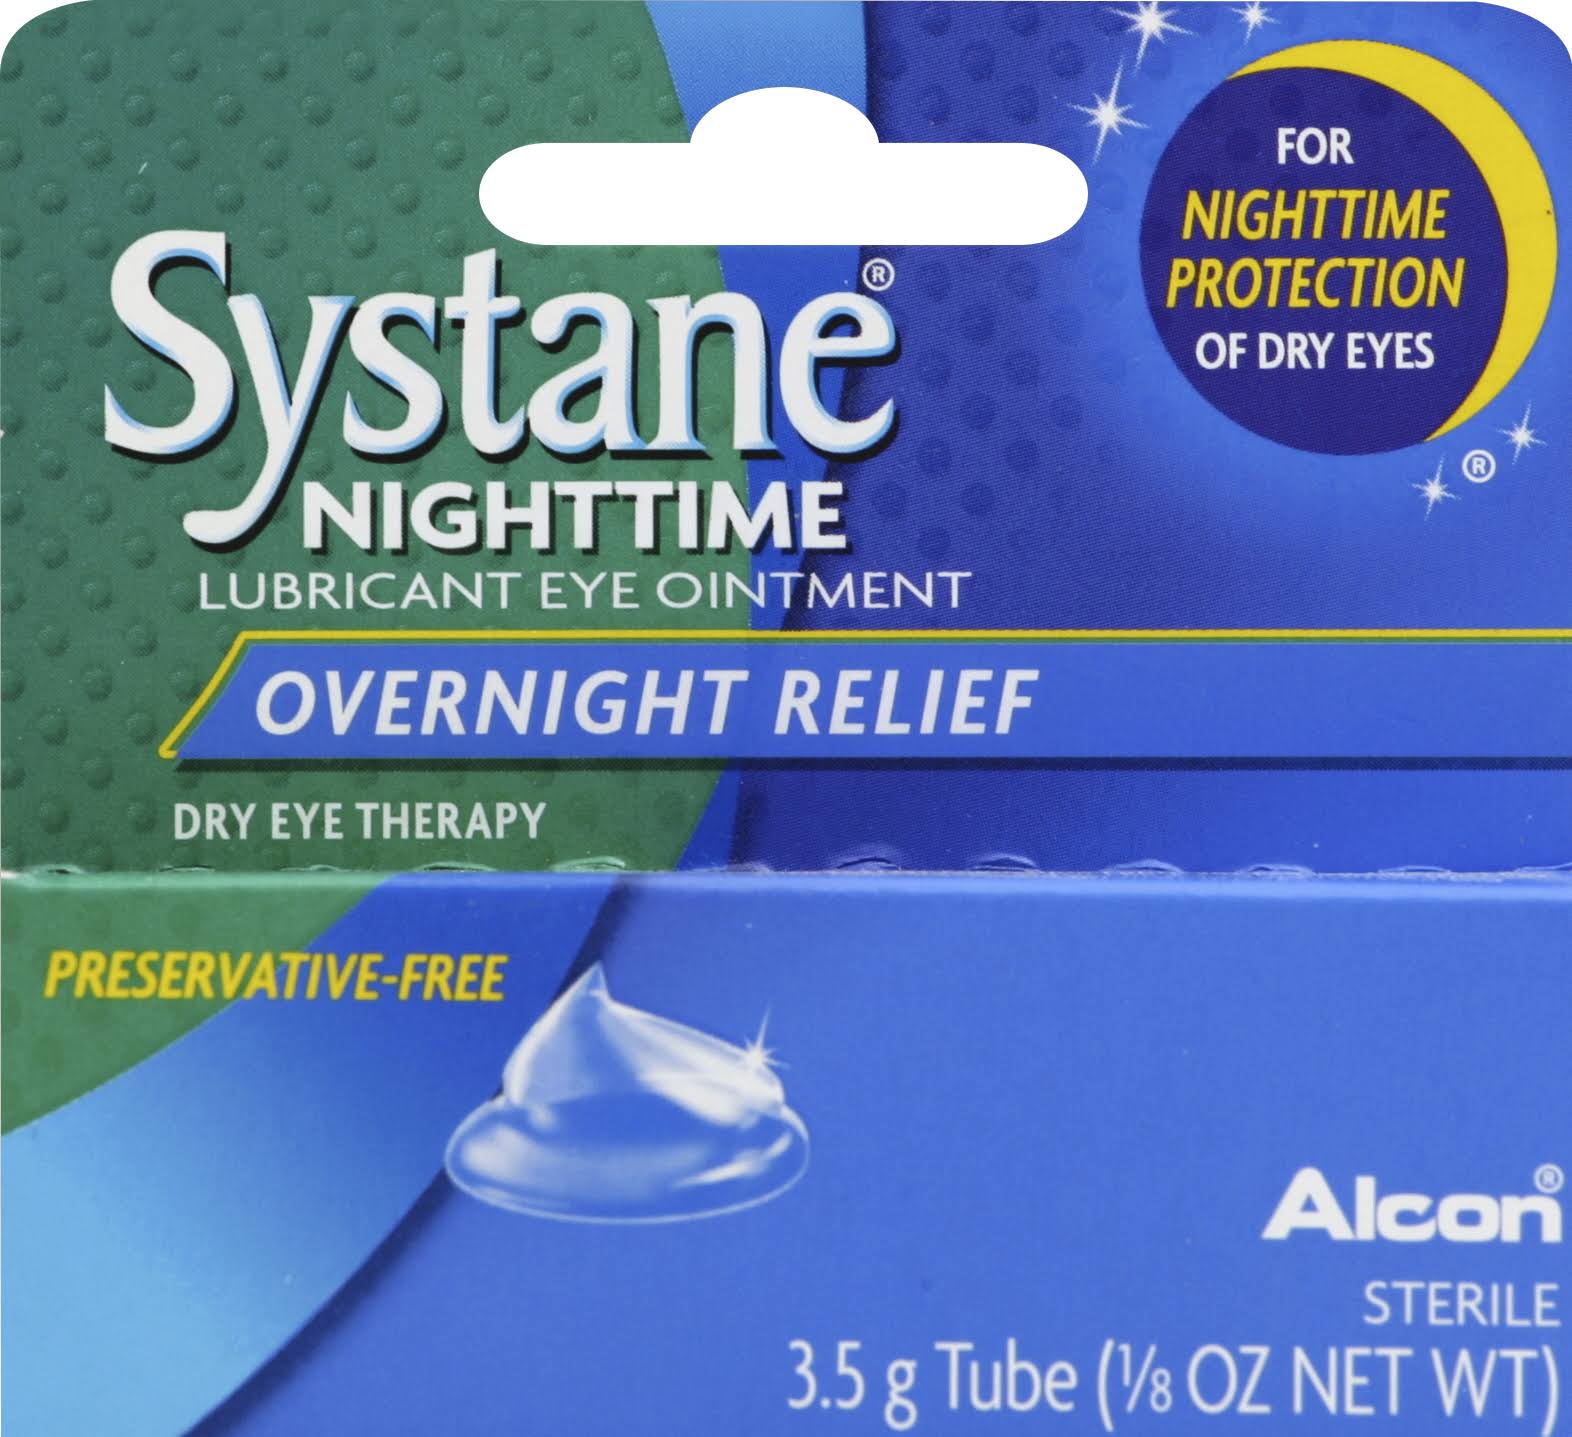 Alcon Systane Sterile Nighttime Lubricant Eye Ointment - Overnight Relief, 1/8oz